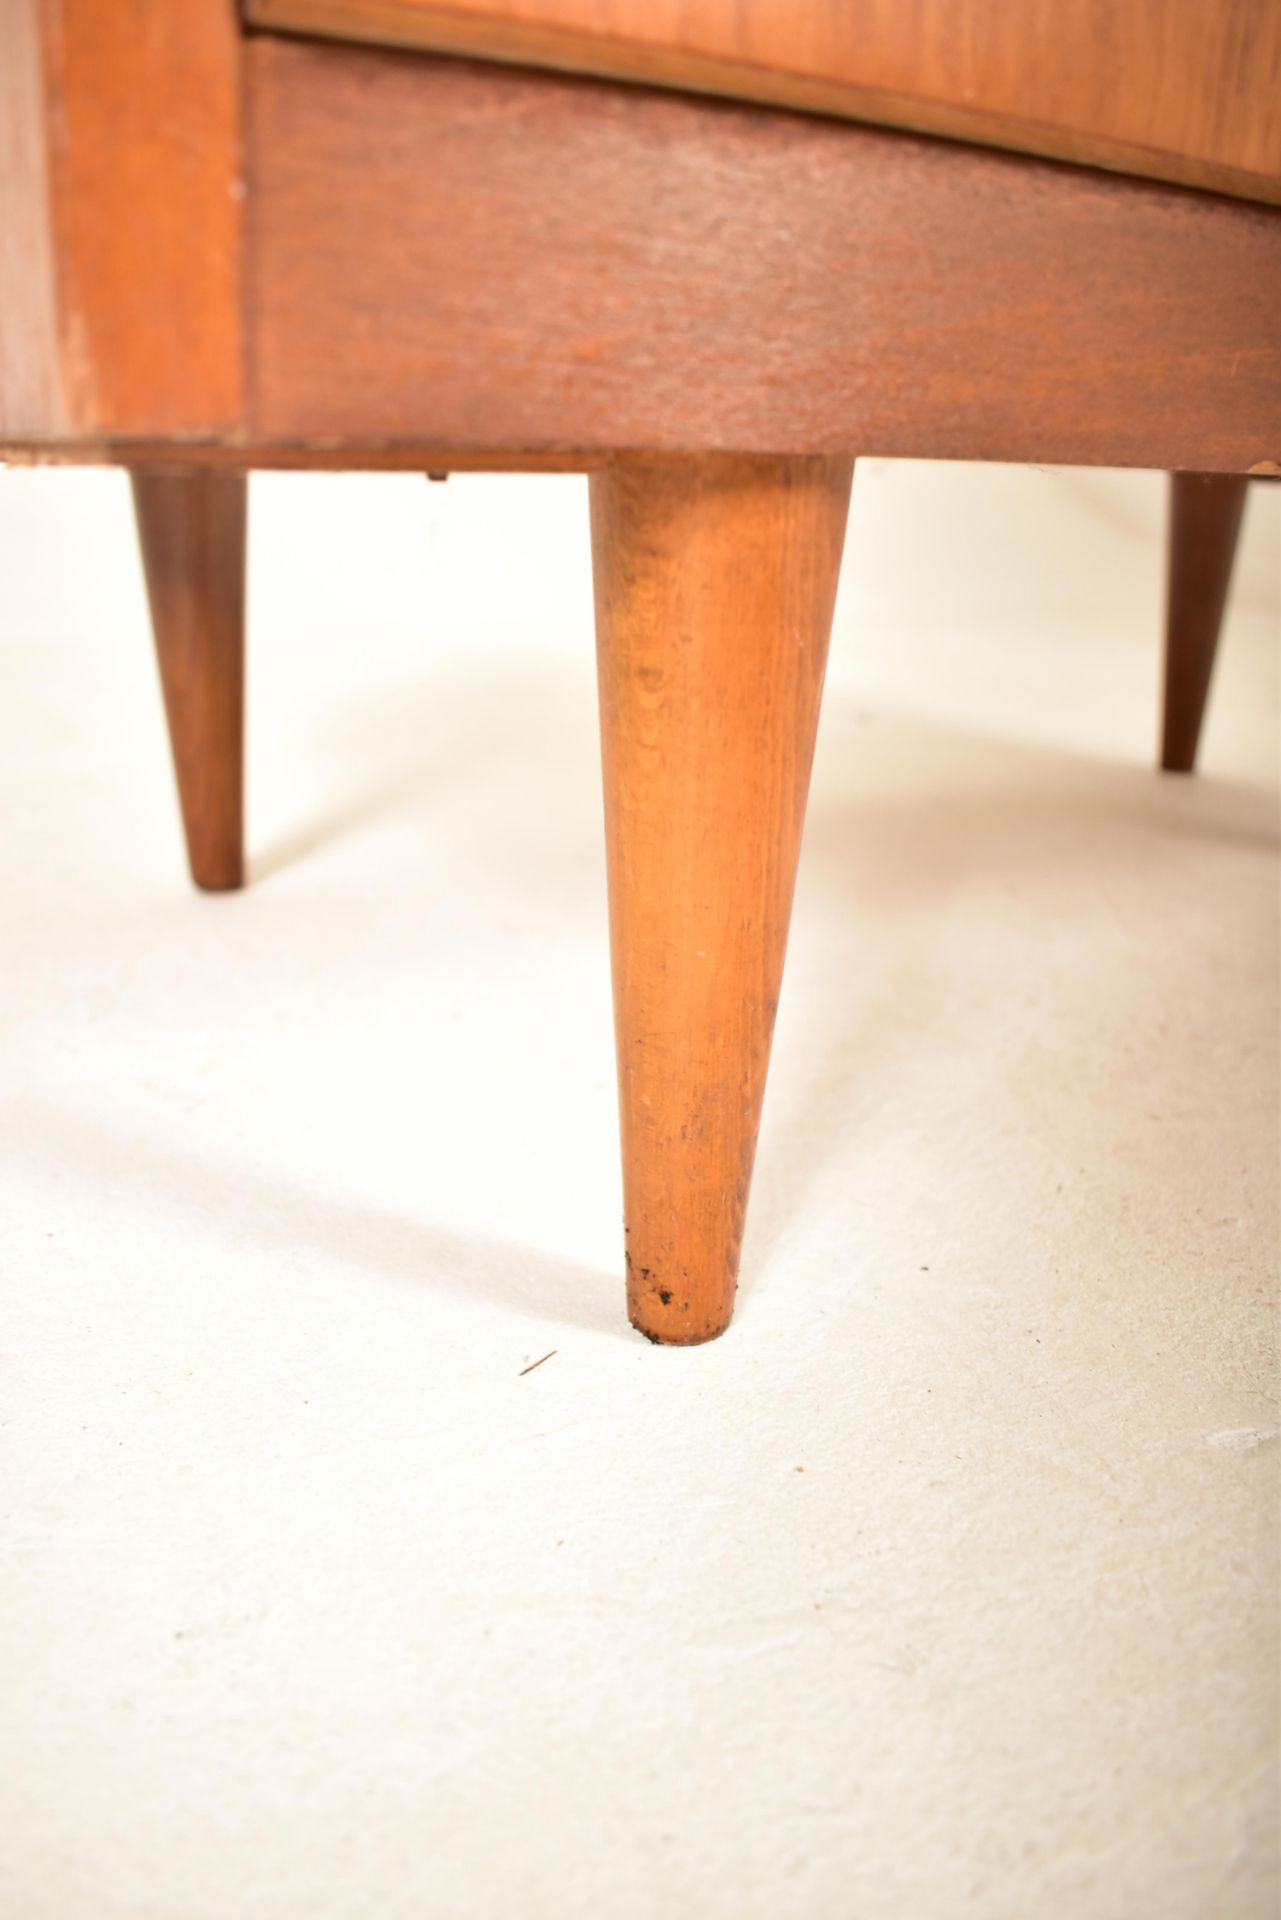 LEBUS FURNITURE - MID CENTURY TEAK UPRIGHT CHEST OF DRAWERS - Image 3 of 5